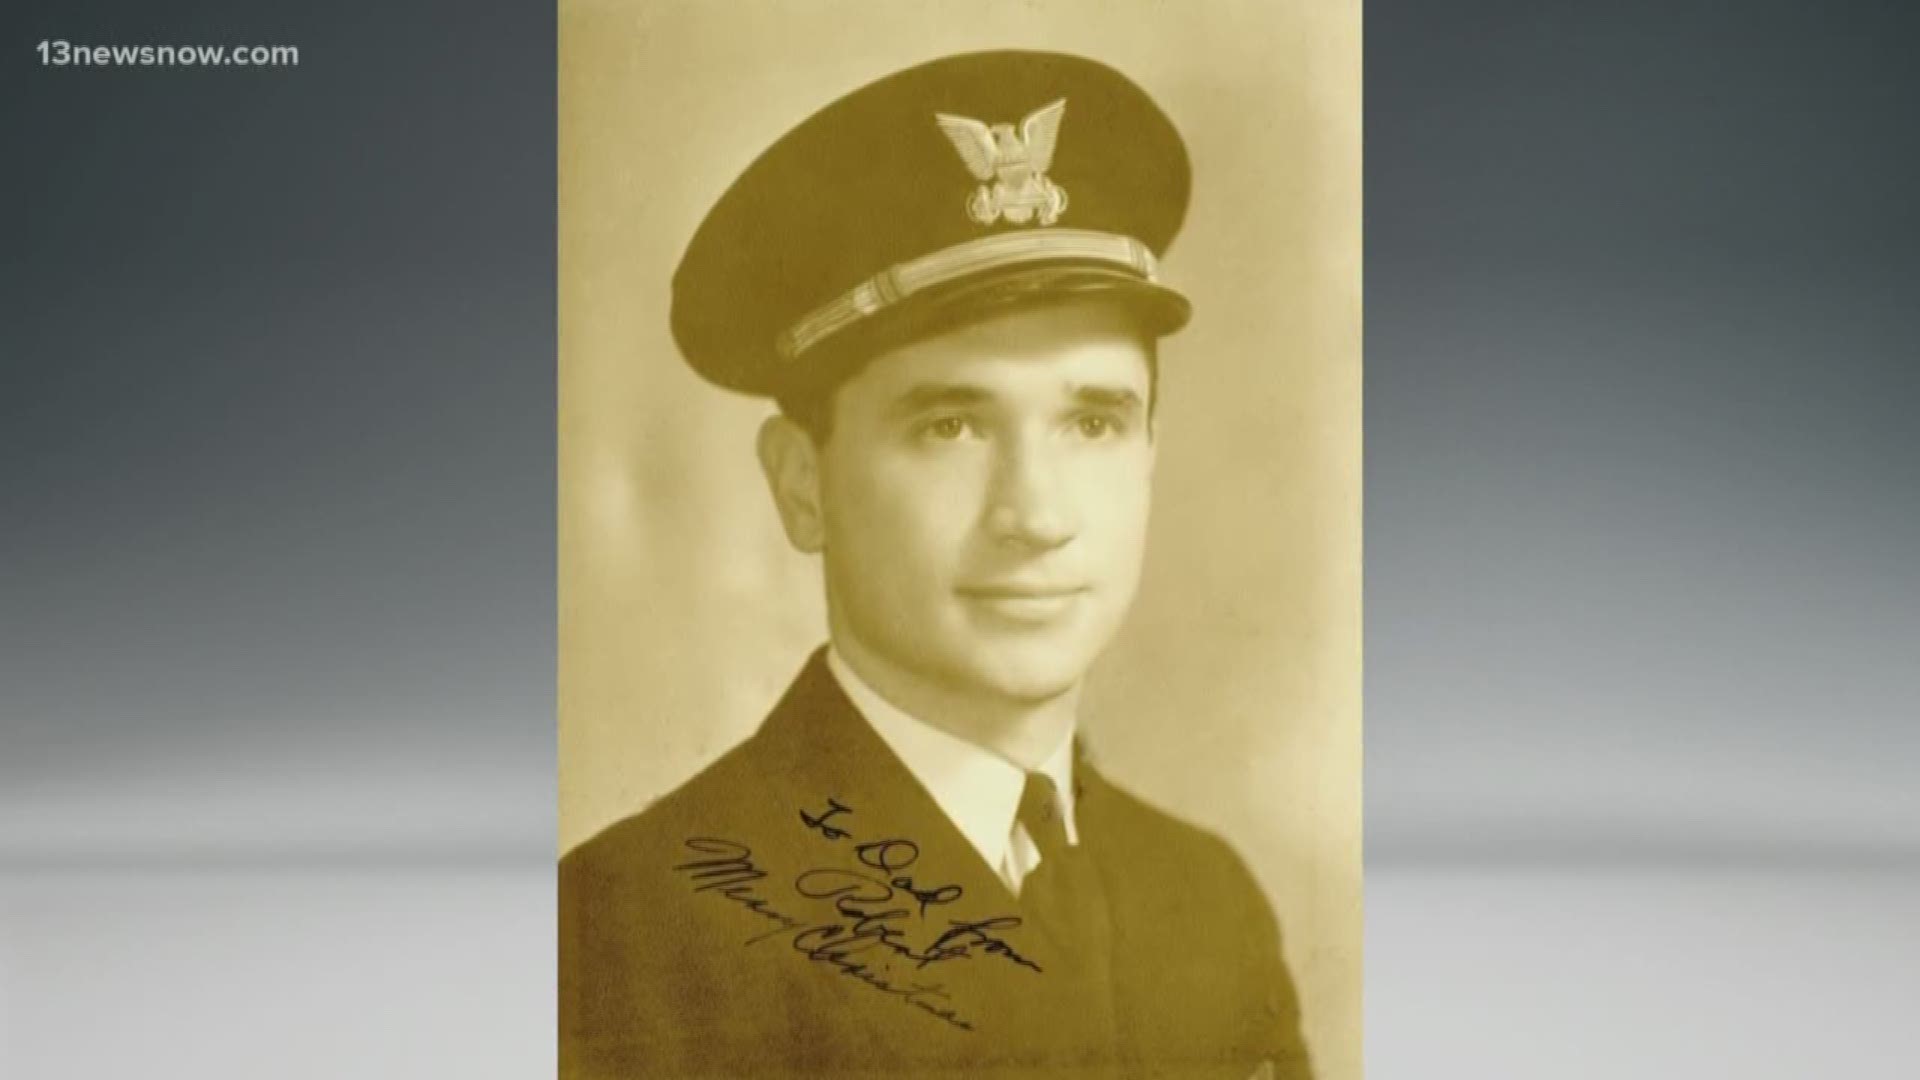 In a salute to Lieutenant Robert Prause, Jr., who is credited with saving 133 lives after a U-Boat attack, the U.S. Coast Guard is naming a command center after him.